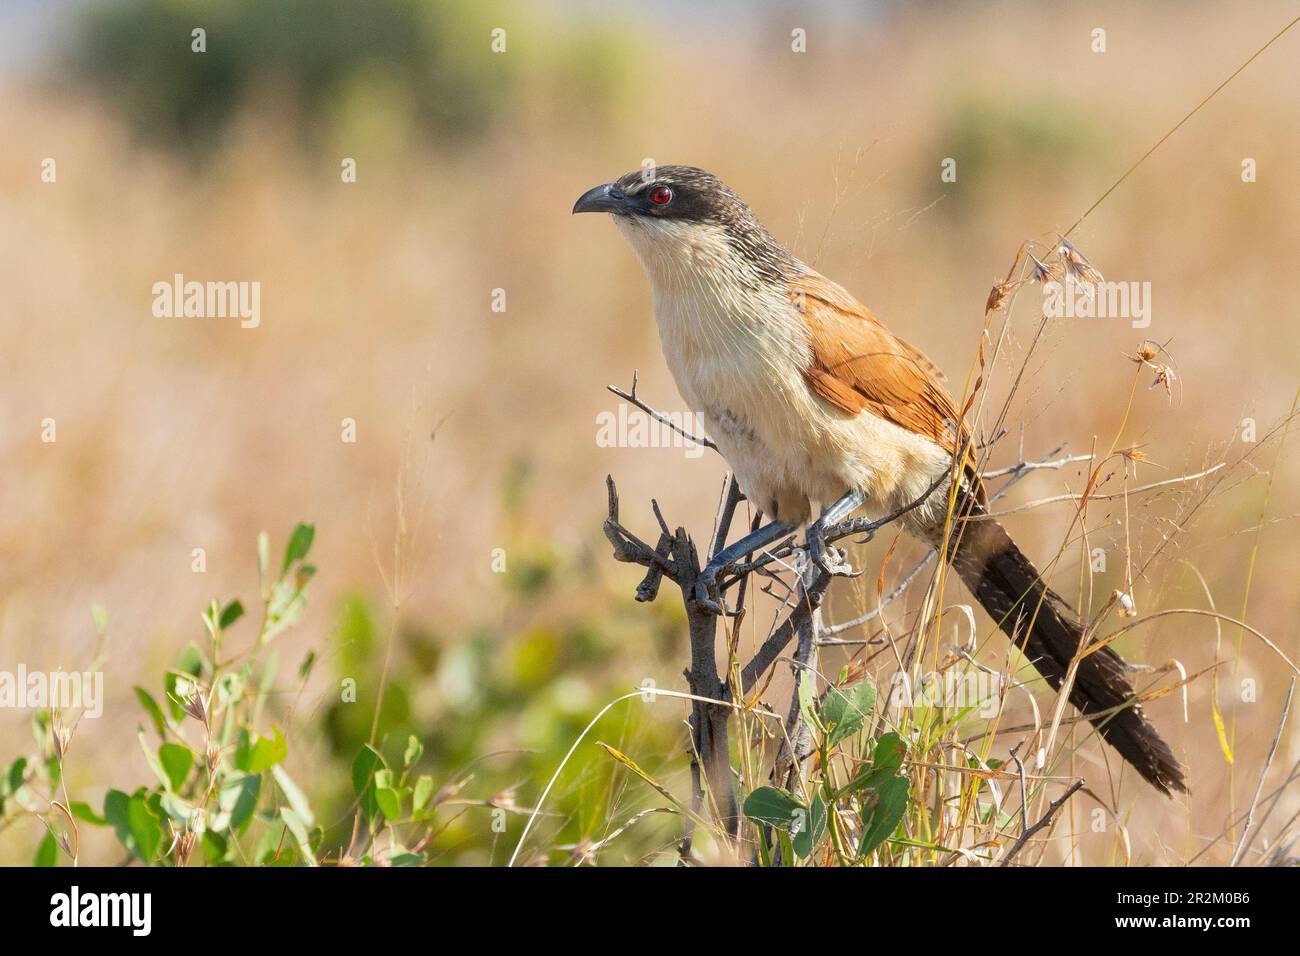 Burchell's Coucal (Centropus burchellii) perched on low shrub at sunset in grassland, Limpopo, South Africa Stock Photo